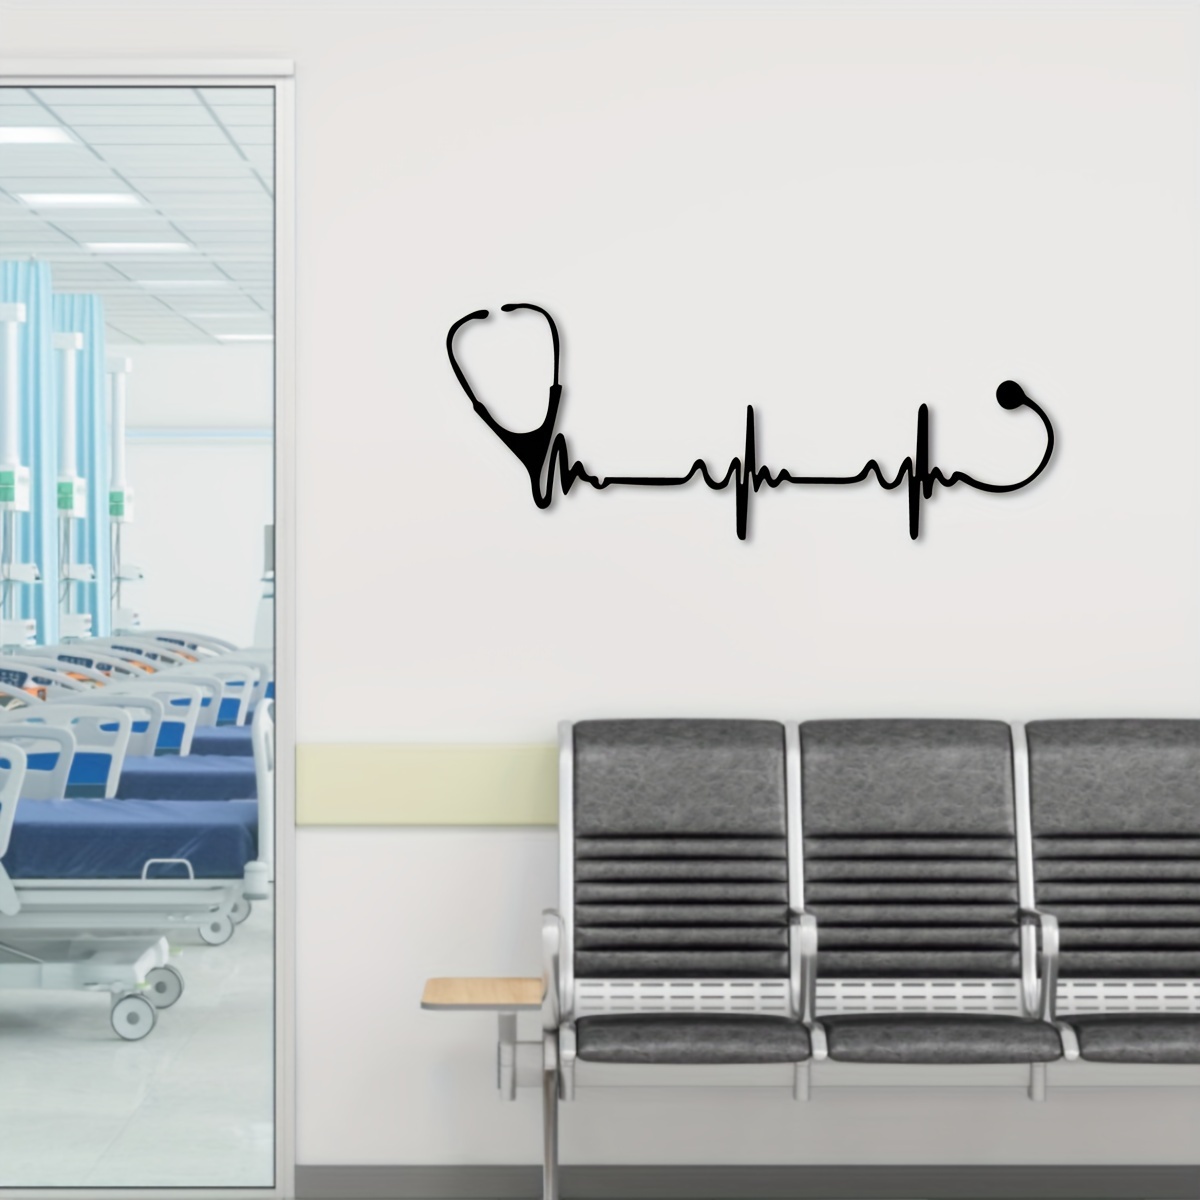 

Stethoscope Metal Wall Art - Perfect Gift For Doctors & Medical Staff, Large Surgical Decor, Iron Construction, Ideal For Home & Office